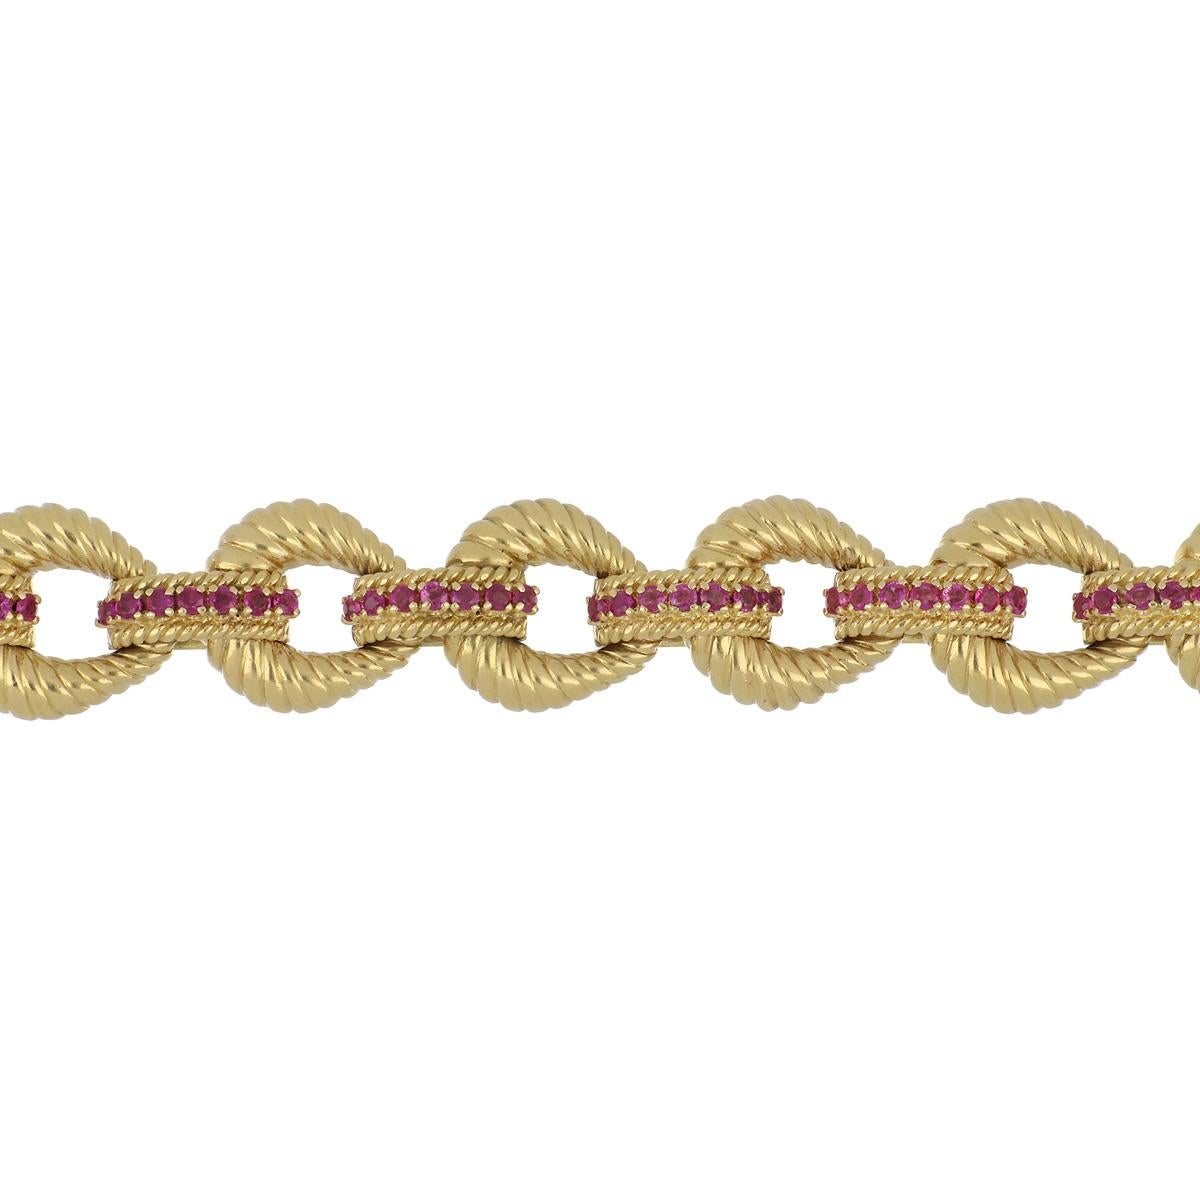 Round Cut Tiffany & Co. 18k Yellow Gold Heavy Link Bracelet with Rubies